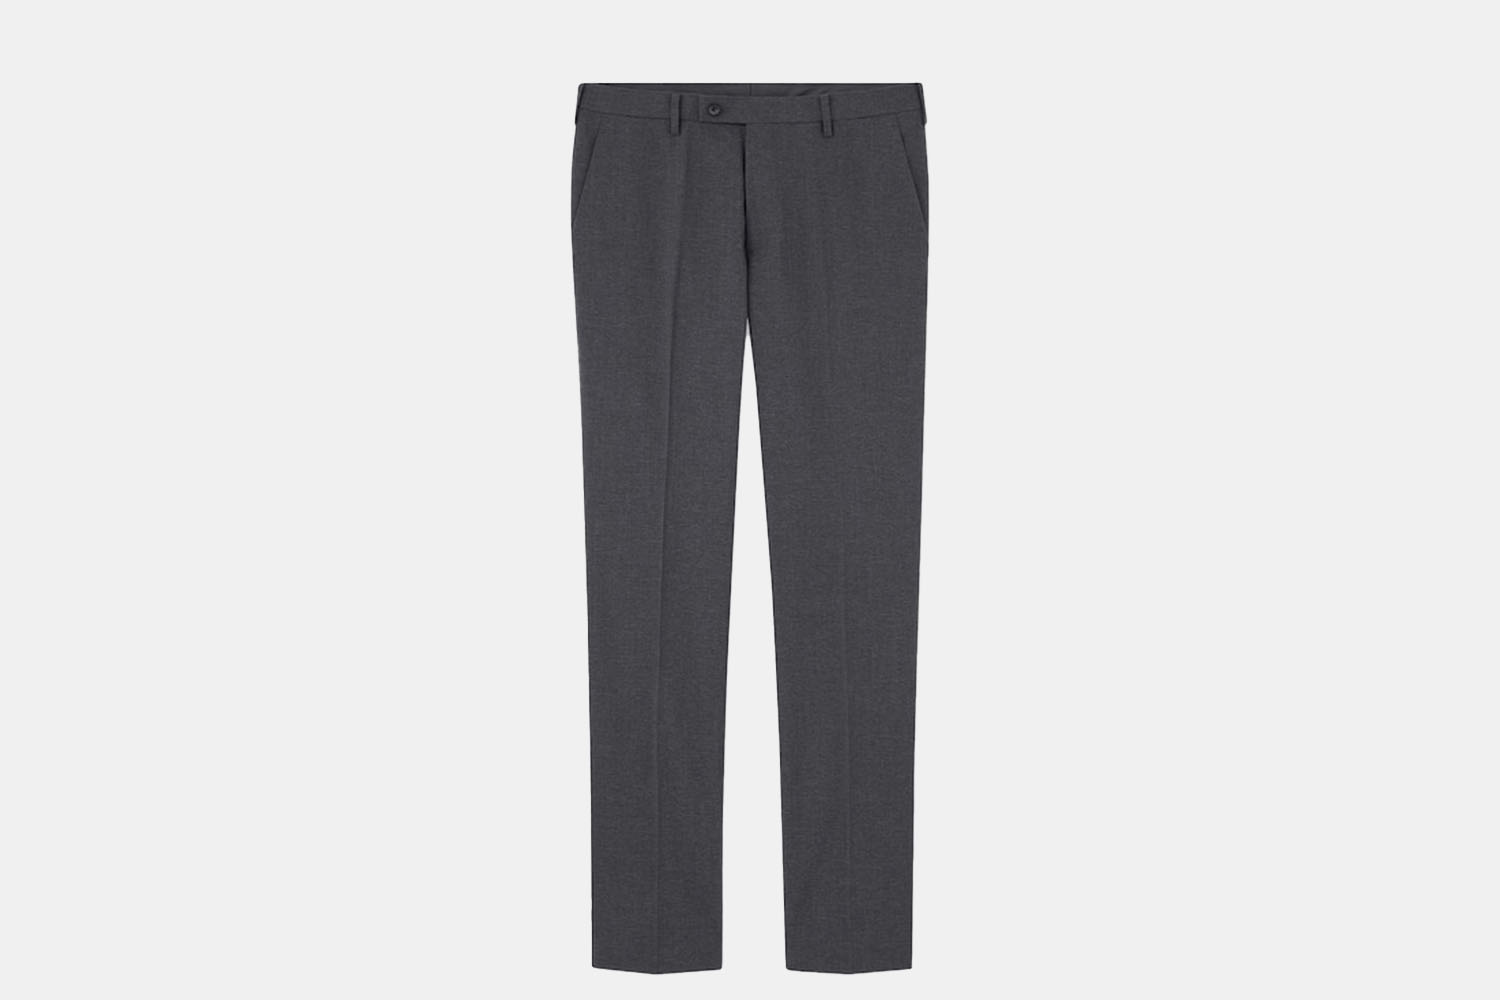 Uniqlo's Comfortable Dress Pants Are 25% Off For the Back to Work Charge -  InsideHook